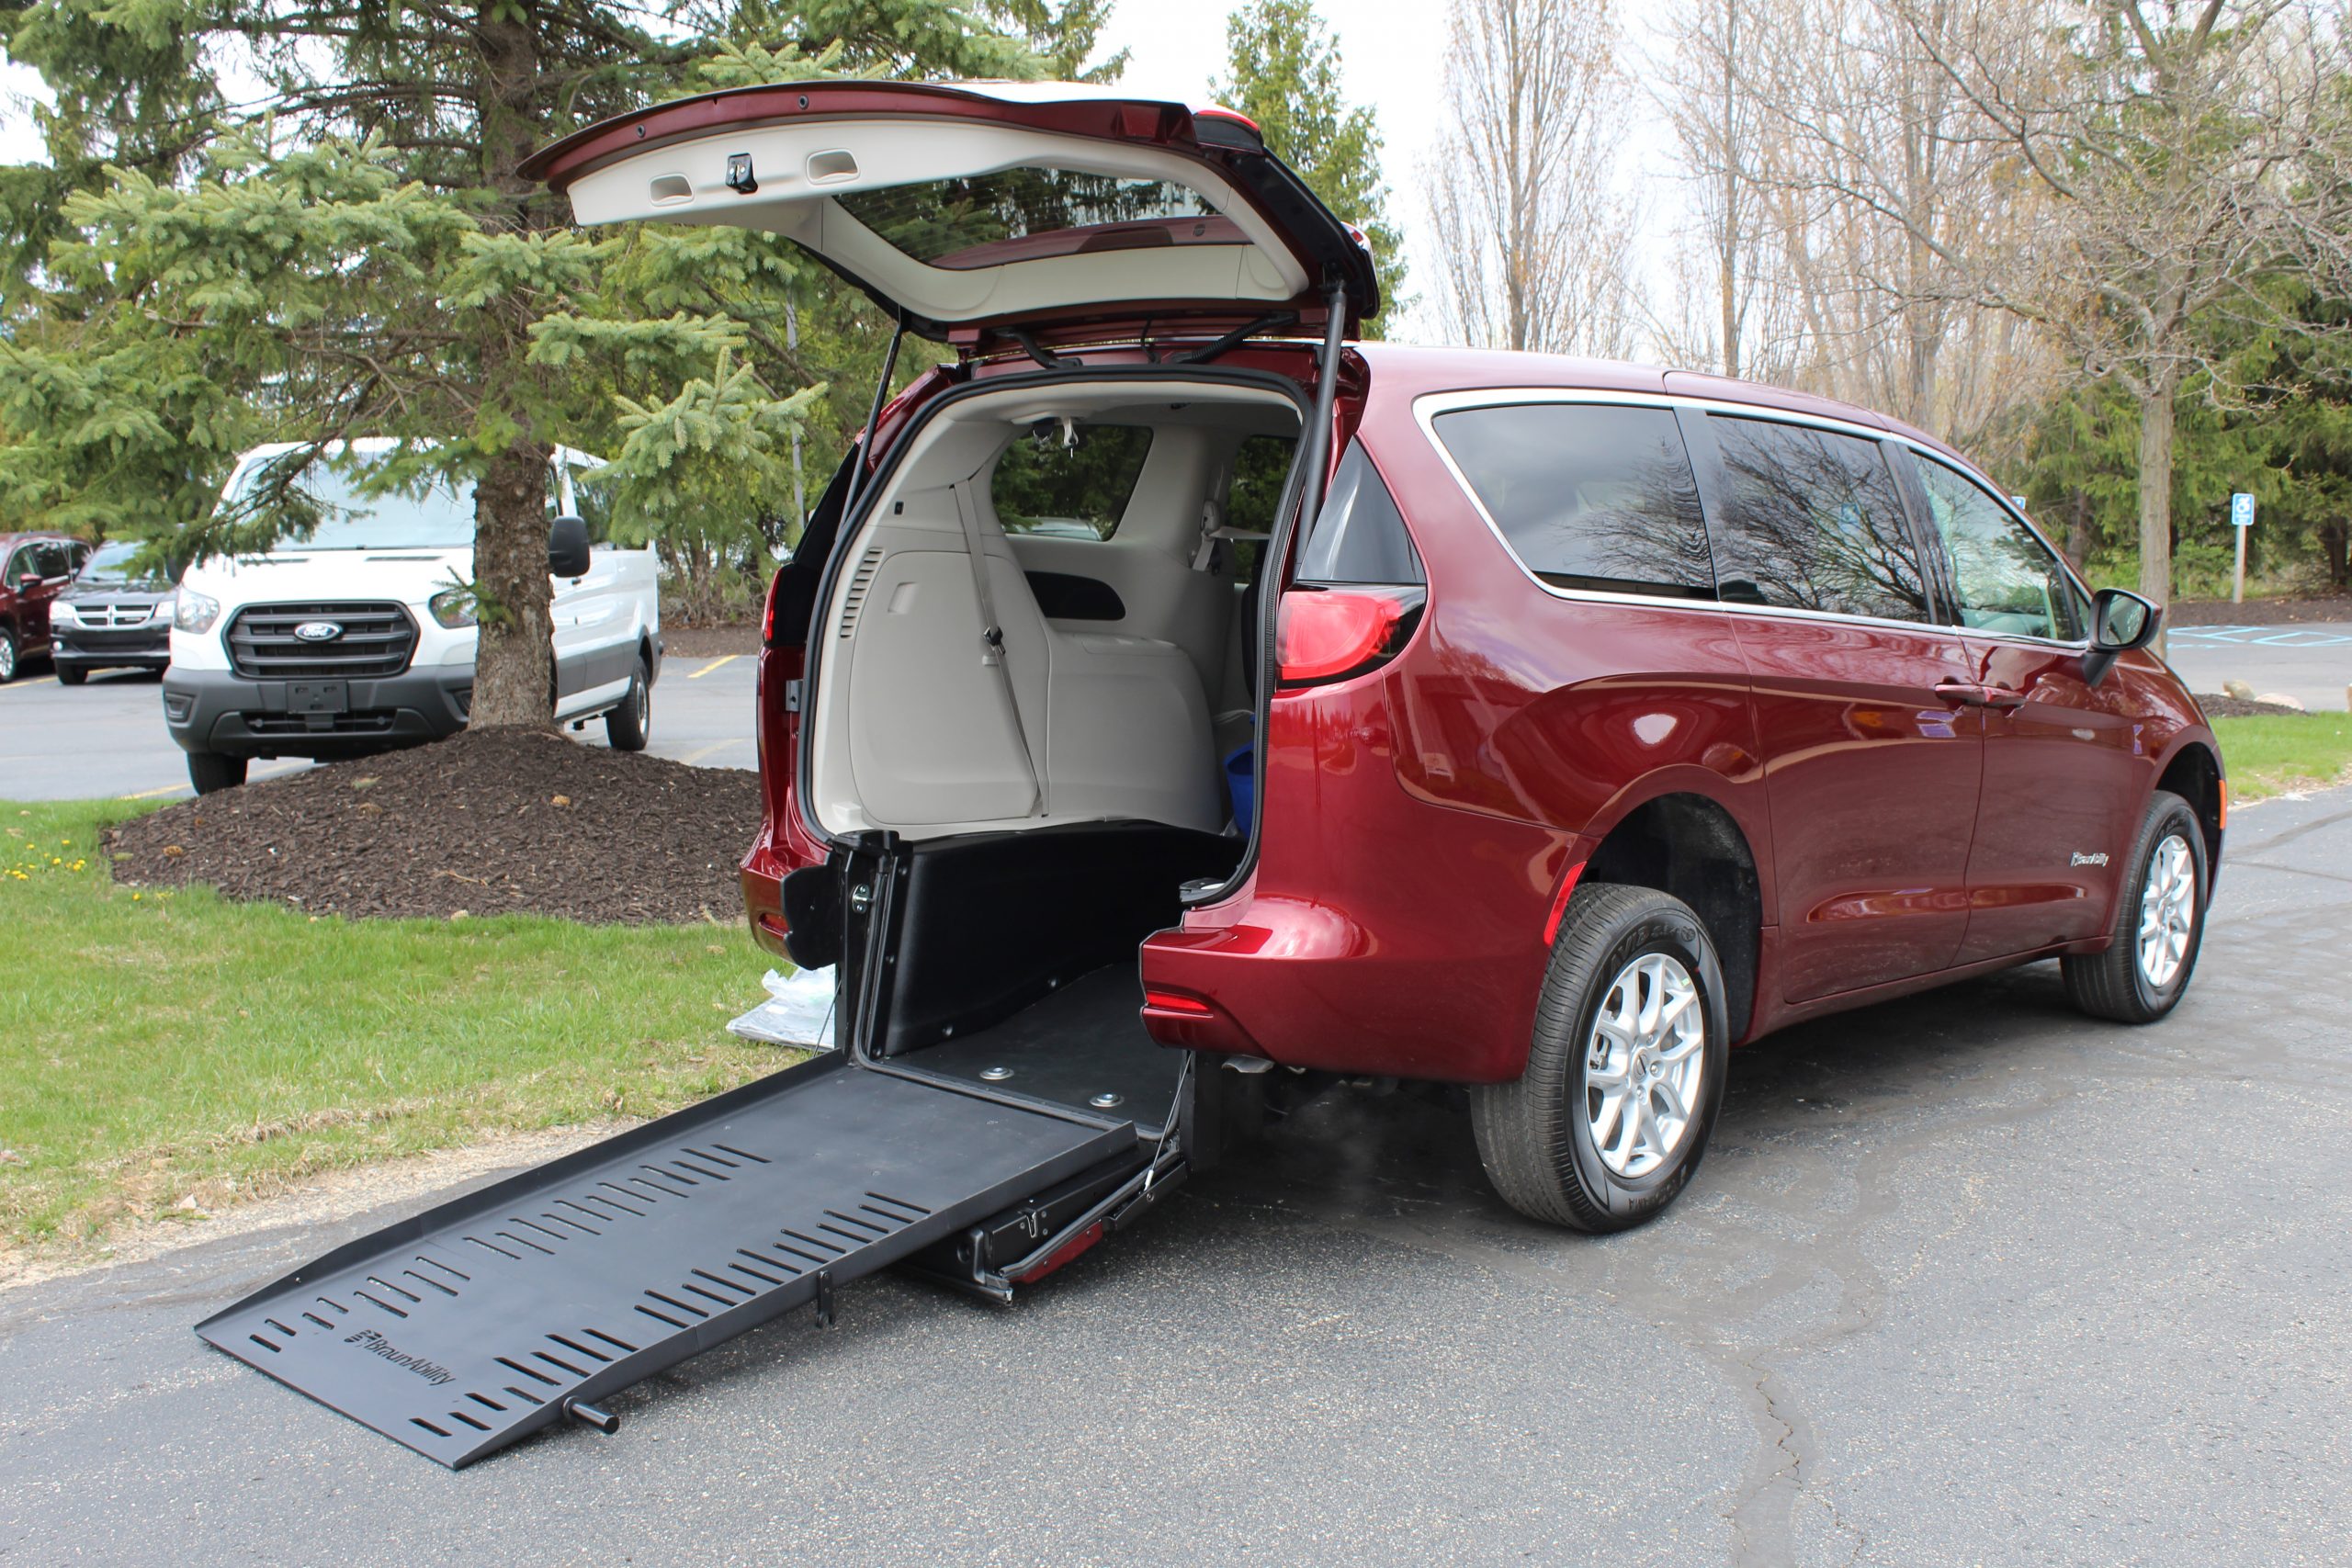 2022 Velvet Red Chrysler Voyager LX with BraunAbility Rear Entry Conversion